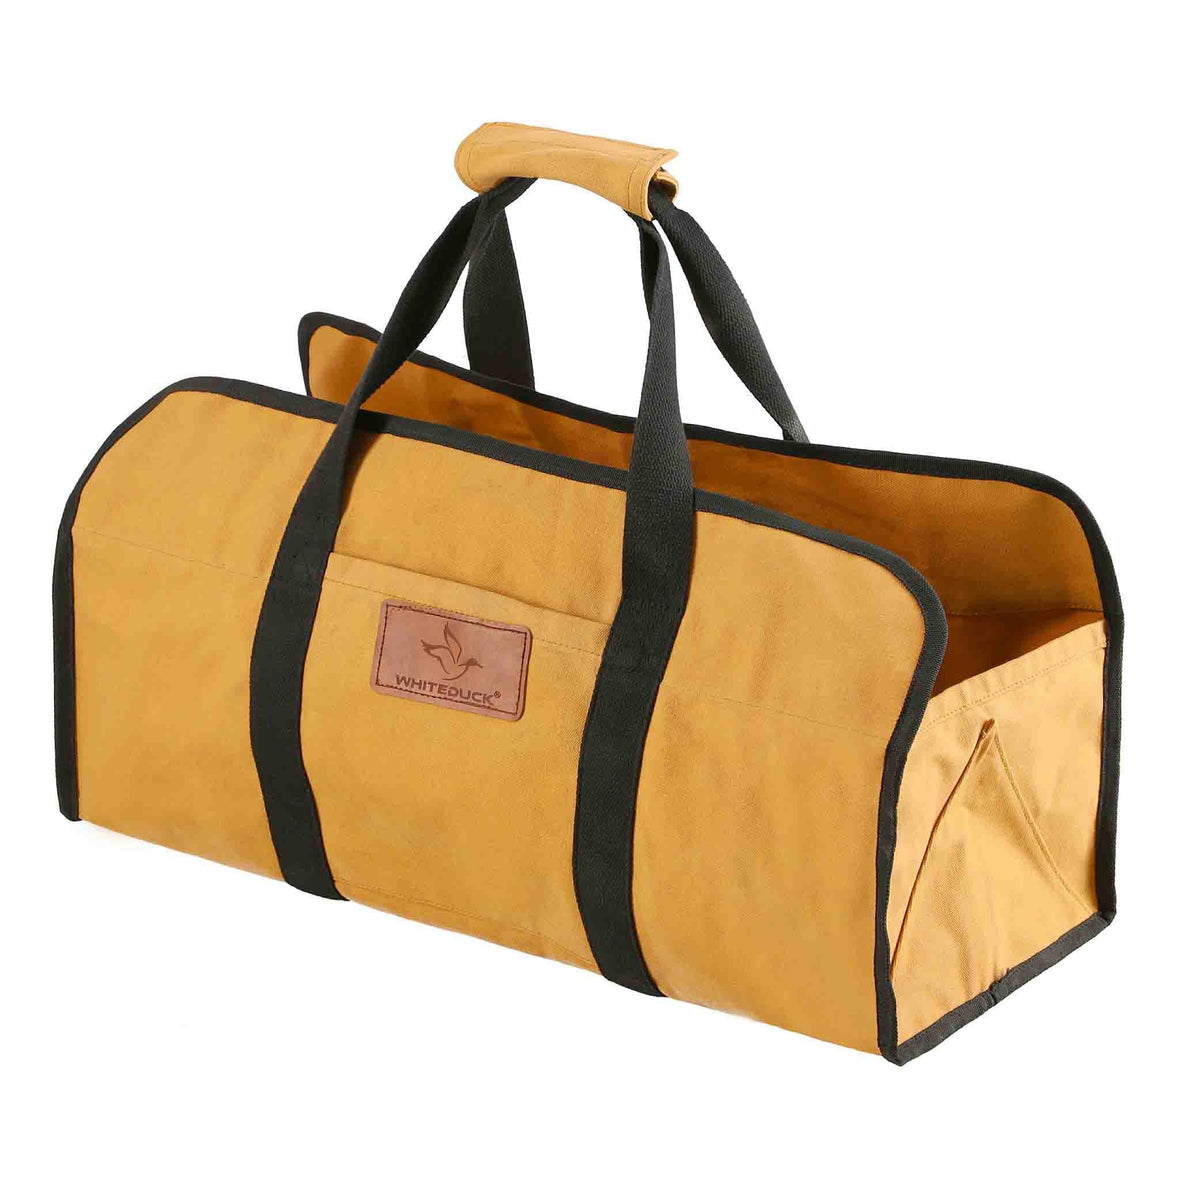 Tote Shape Canvas Firewood Log Carriers